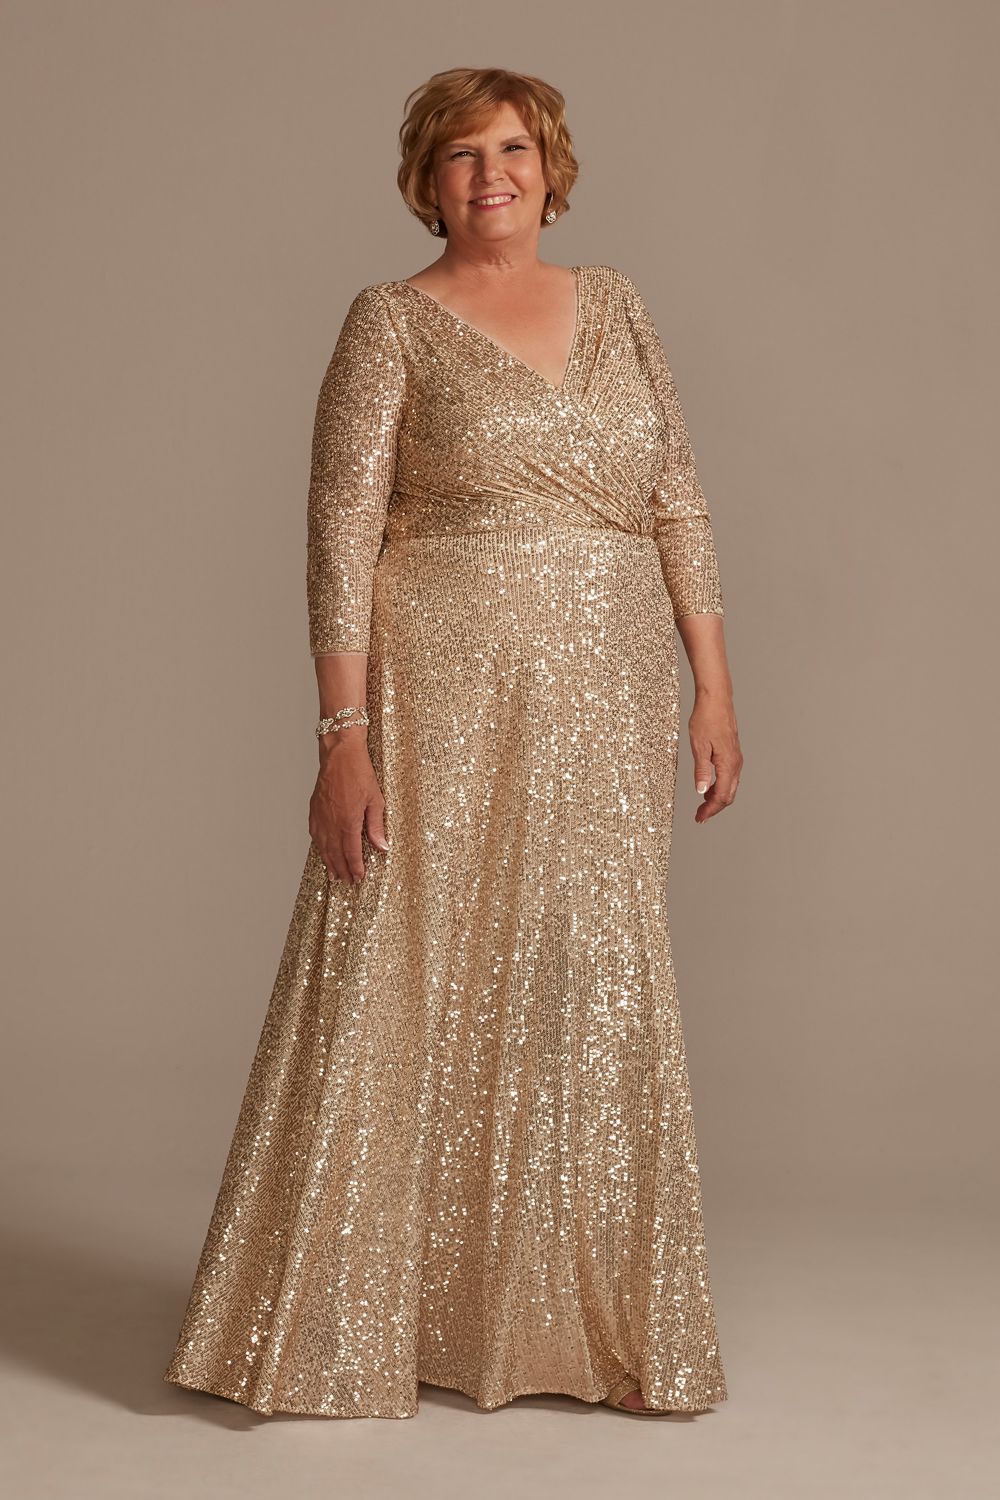 Allover Sequin A-Line Plus Size Gown